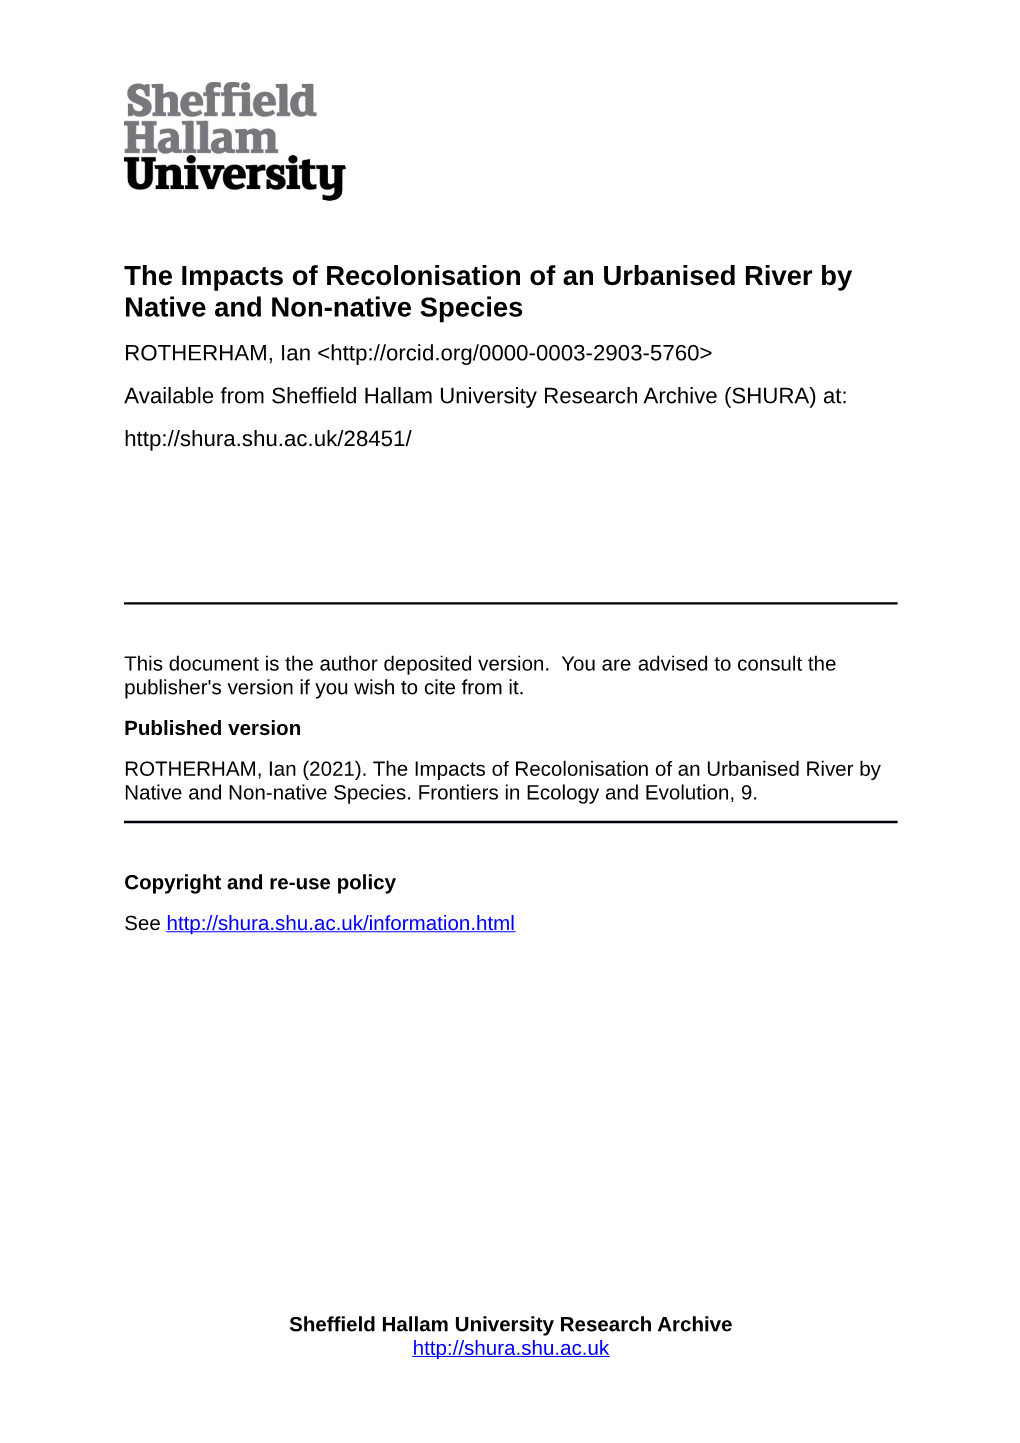 The Impacts of Recolonisation of an Urbanised River by Native and Non-Native Species